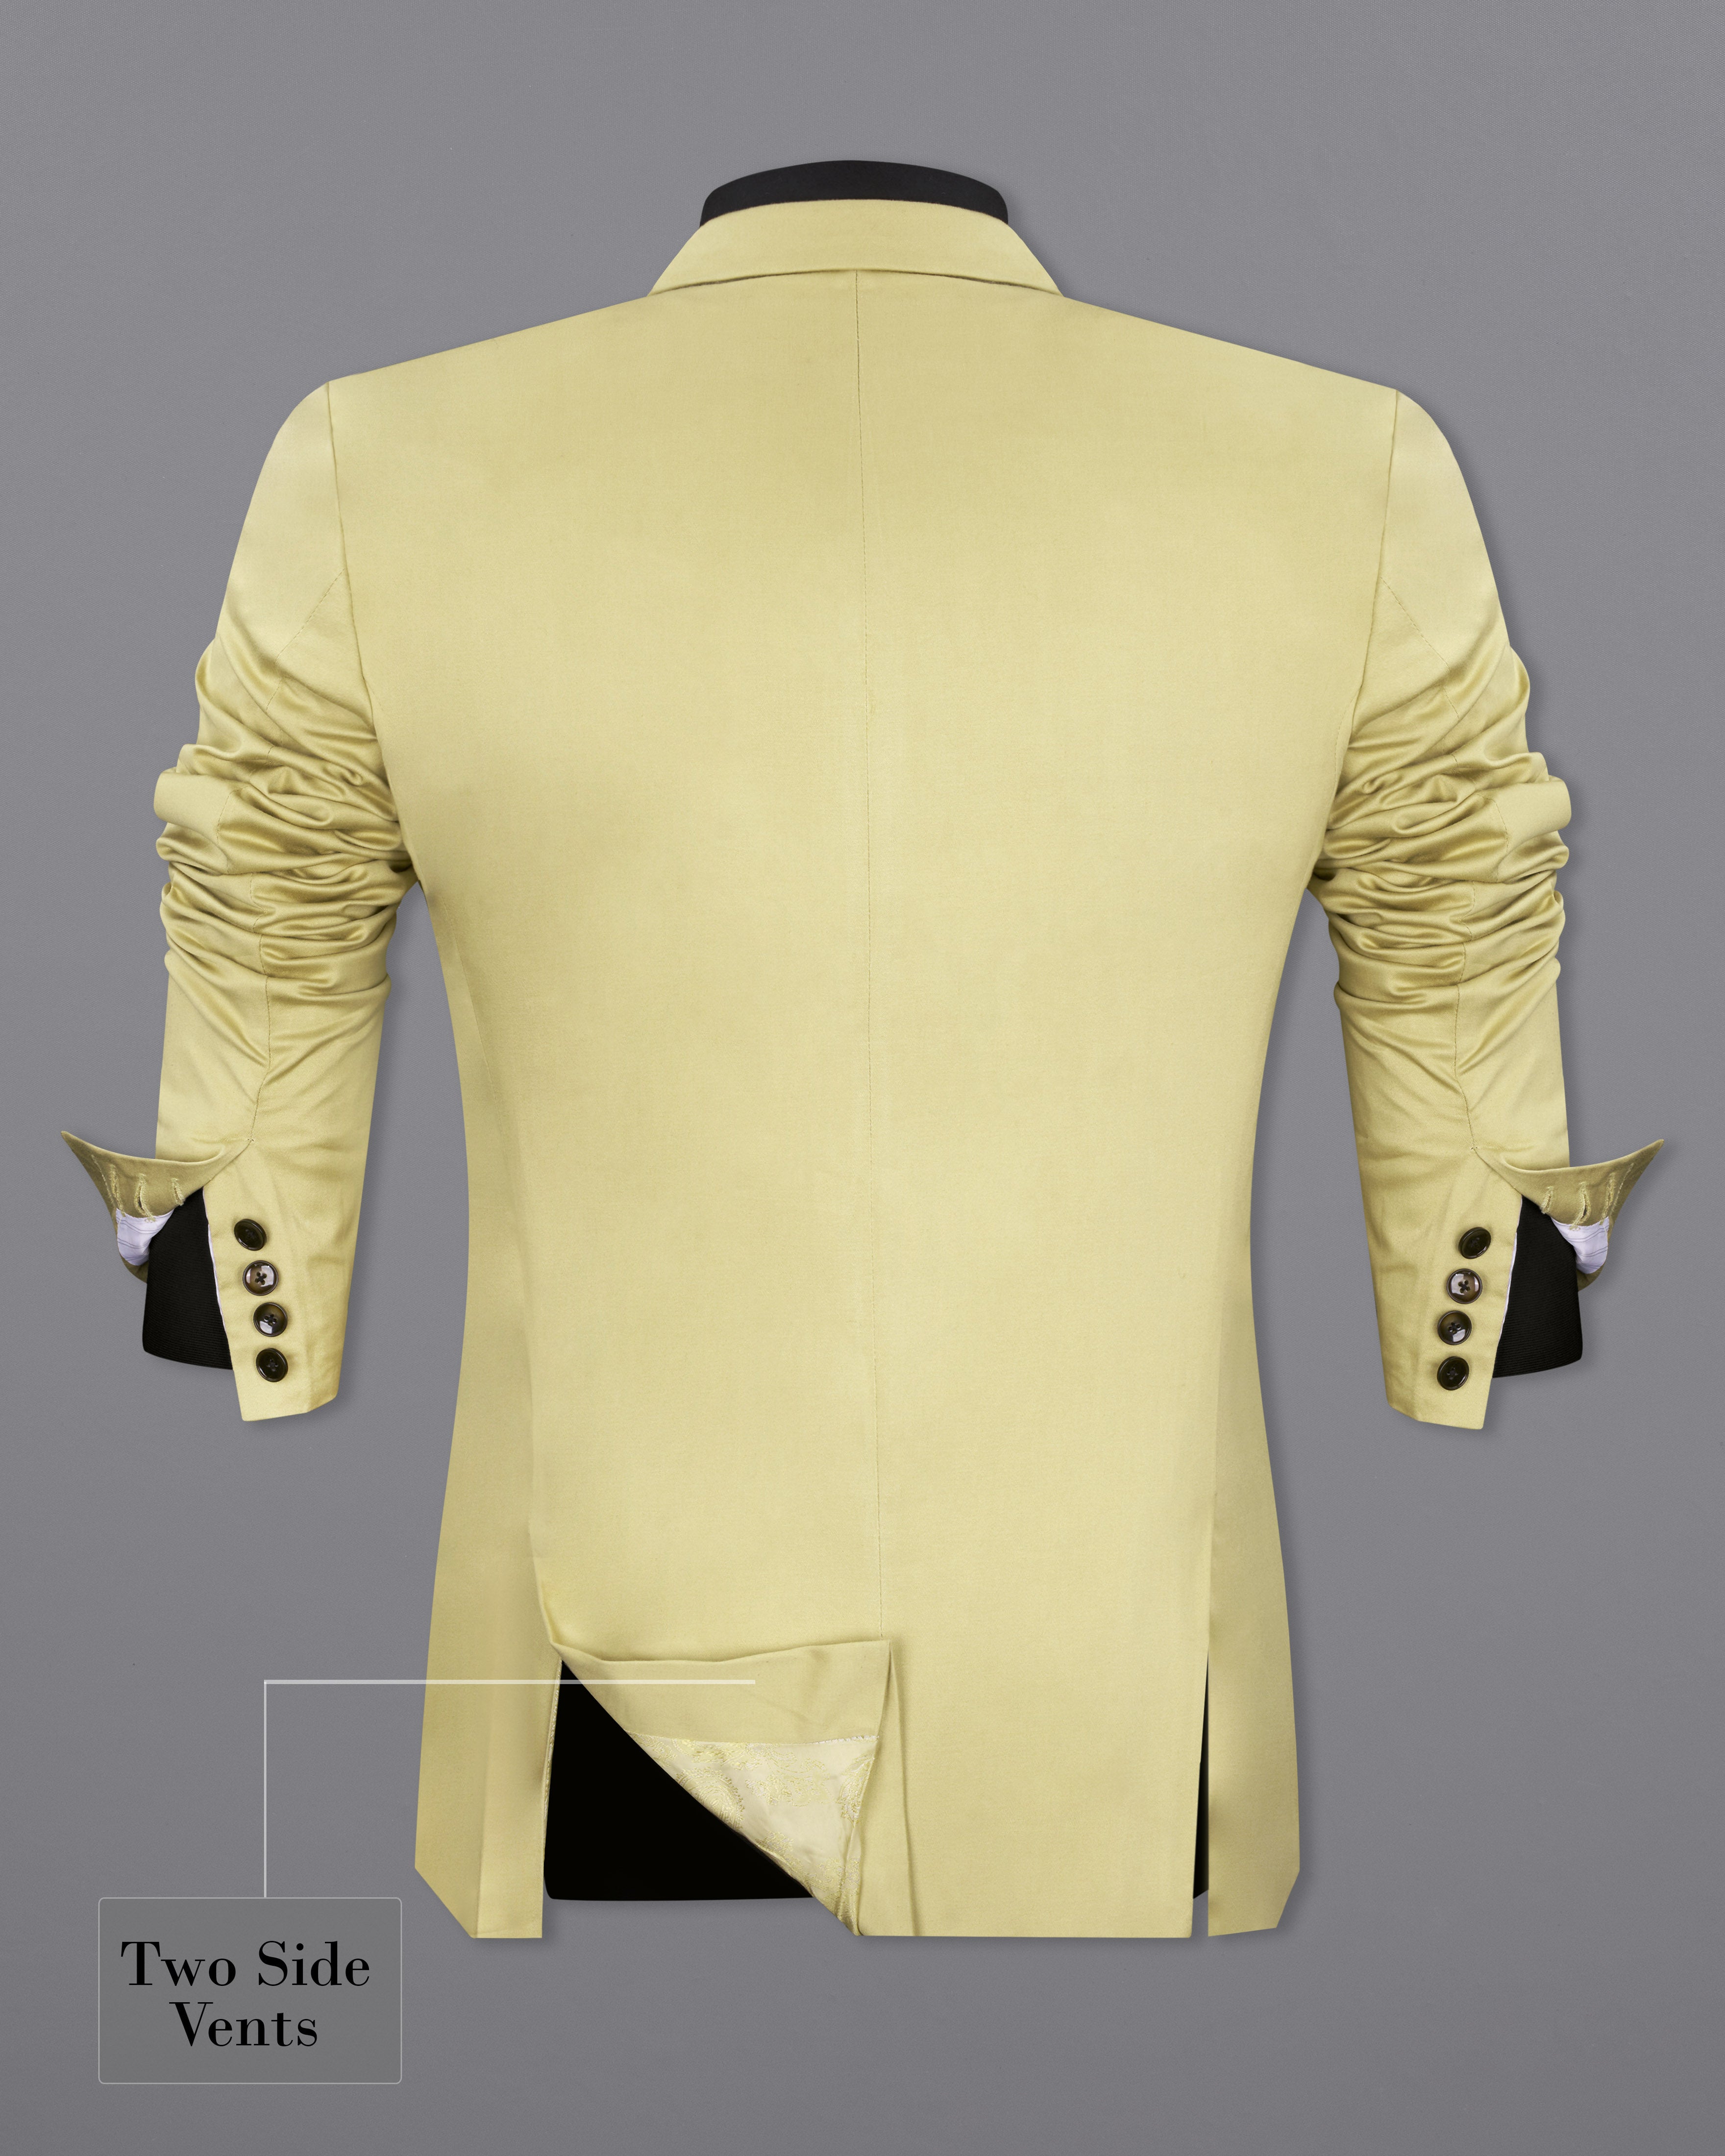 Maize Light Brown Stretchable Double Breasted Premium Cotton Traveler Suit ST2658-DB-36, ST2658-DB-38, ST2658-DB-40, ST2658-DB-42, ST2658-DB-44, ST2658-DB-46, ST2658-DB-48, ST2658-DB-50, ST2658-DB-52, ST2658-DB-54, ST2658-DB-56, ST2658-DB-58, ST2658-DB-60